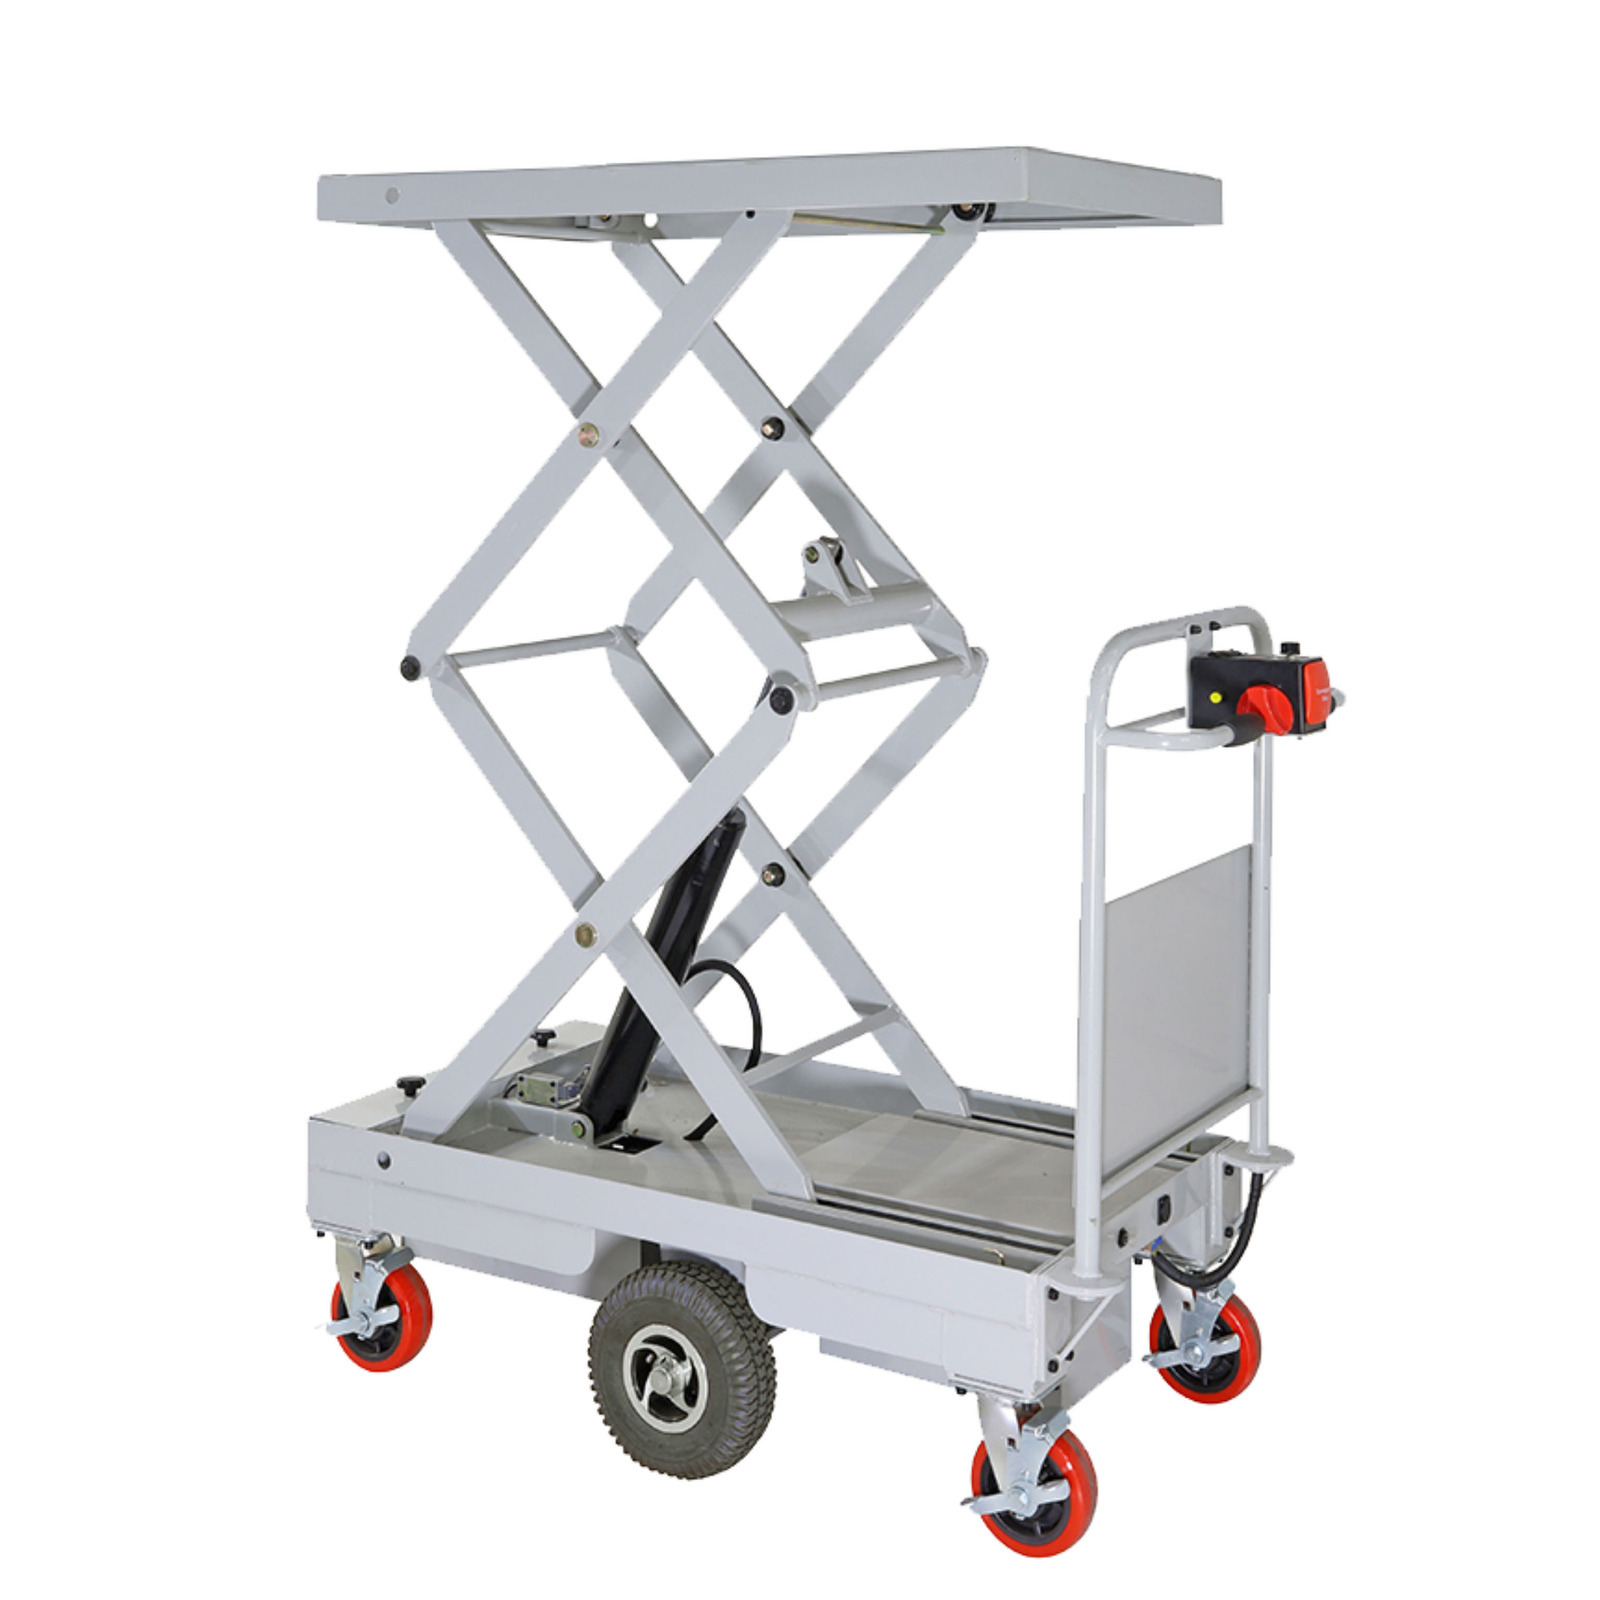 Self Propelled Electric Scissor Lift Trolley without Cage (double scissor)